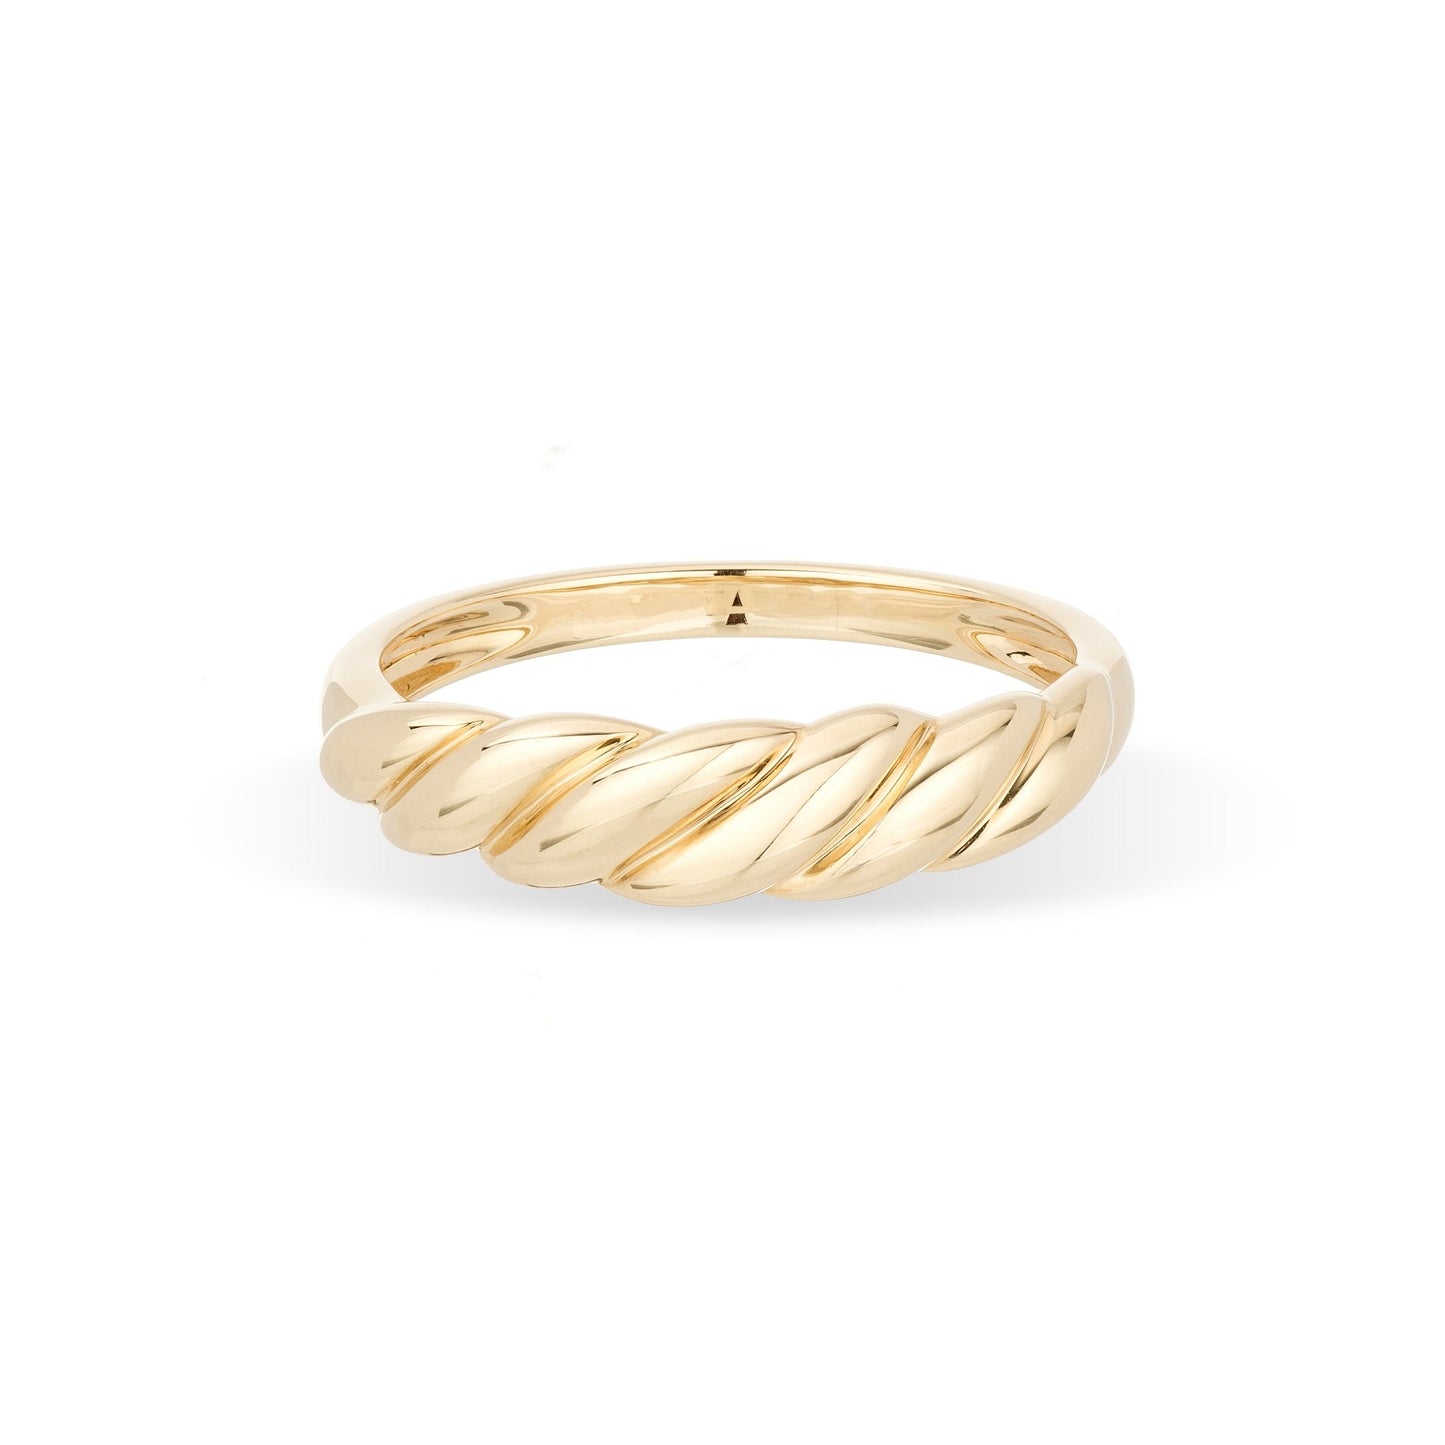 Lasso Dome Ring in Y14k